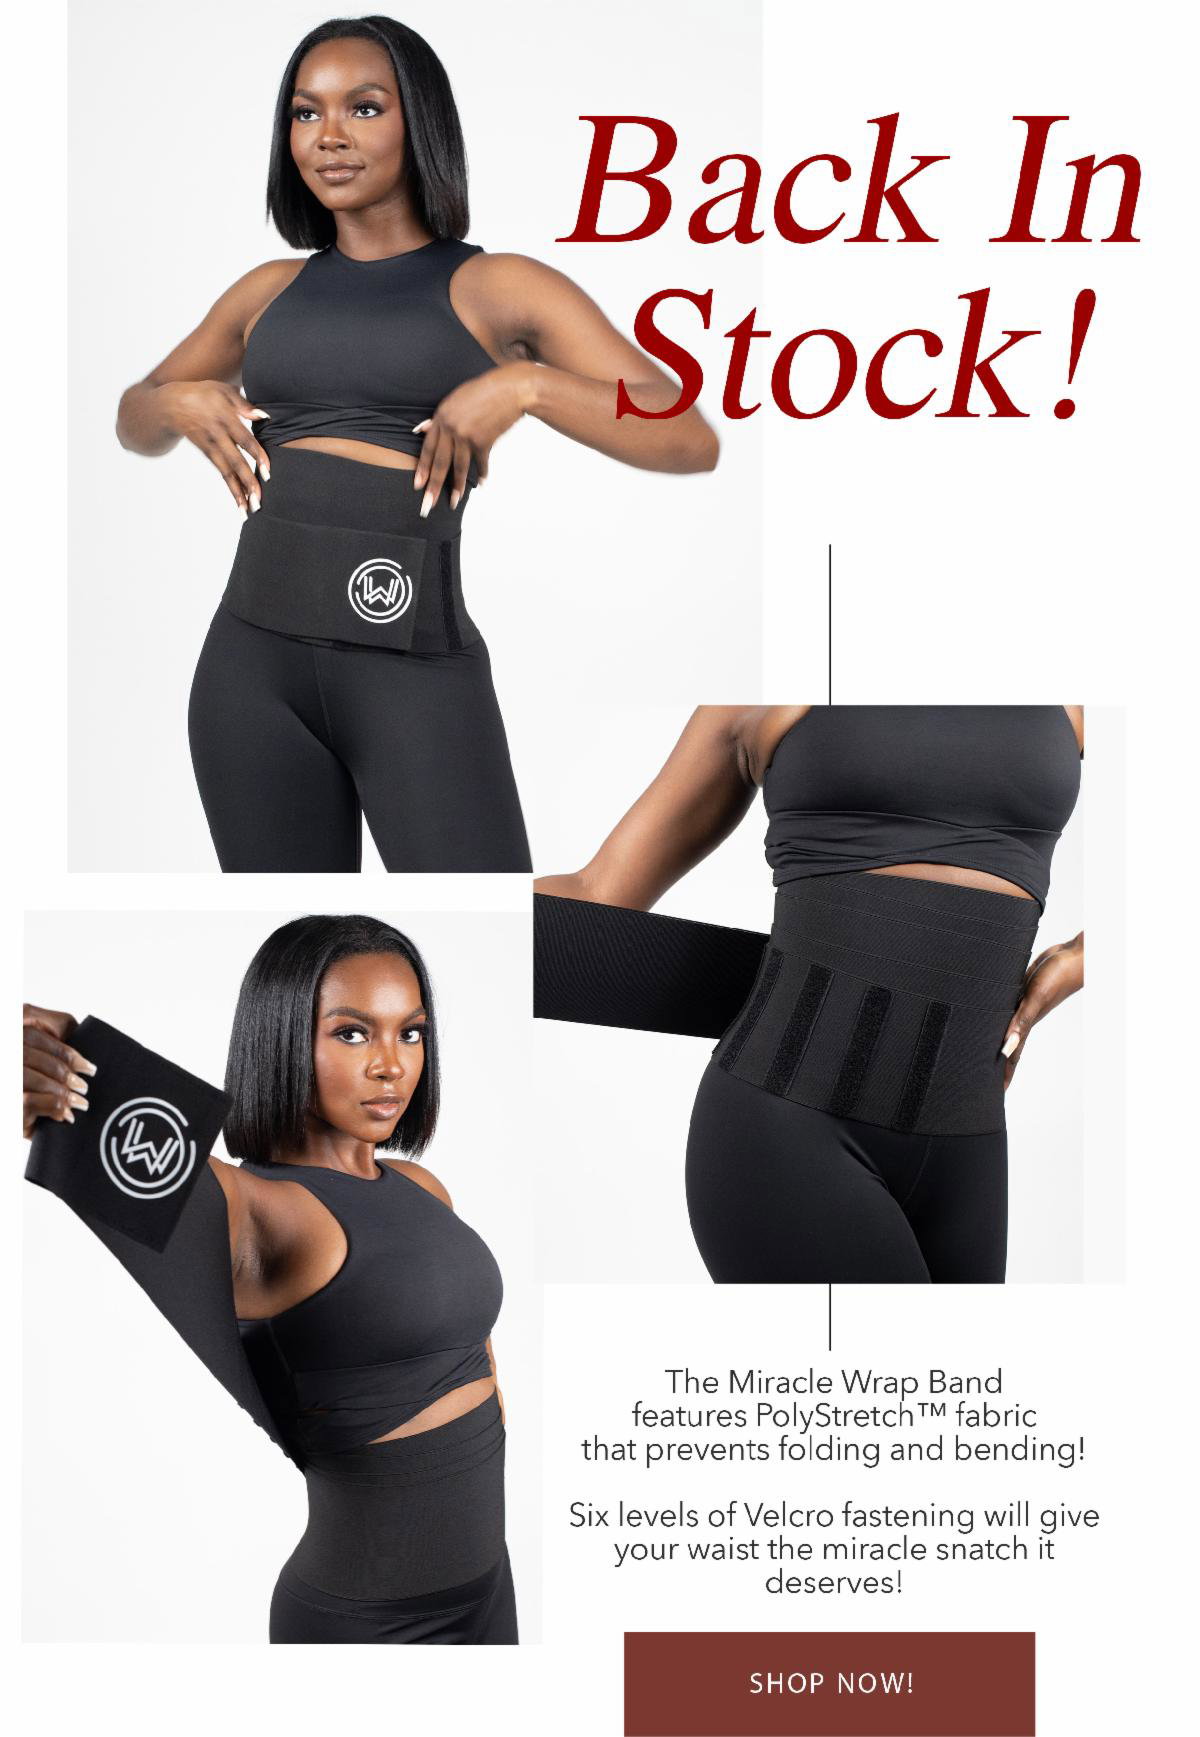 What Waist: The Miracle Wrap Band is Back In Stock!